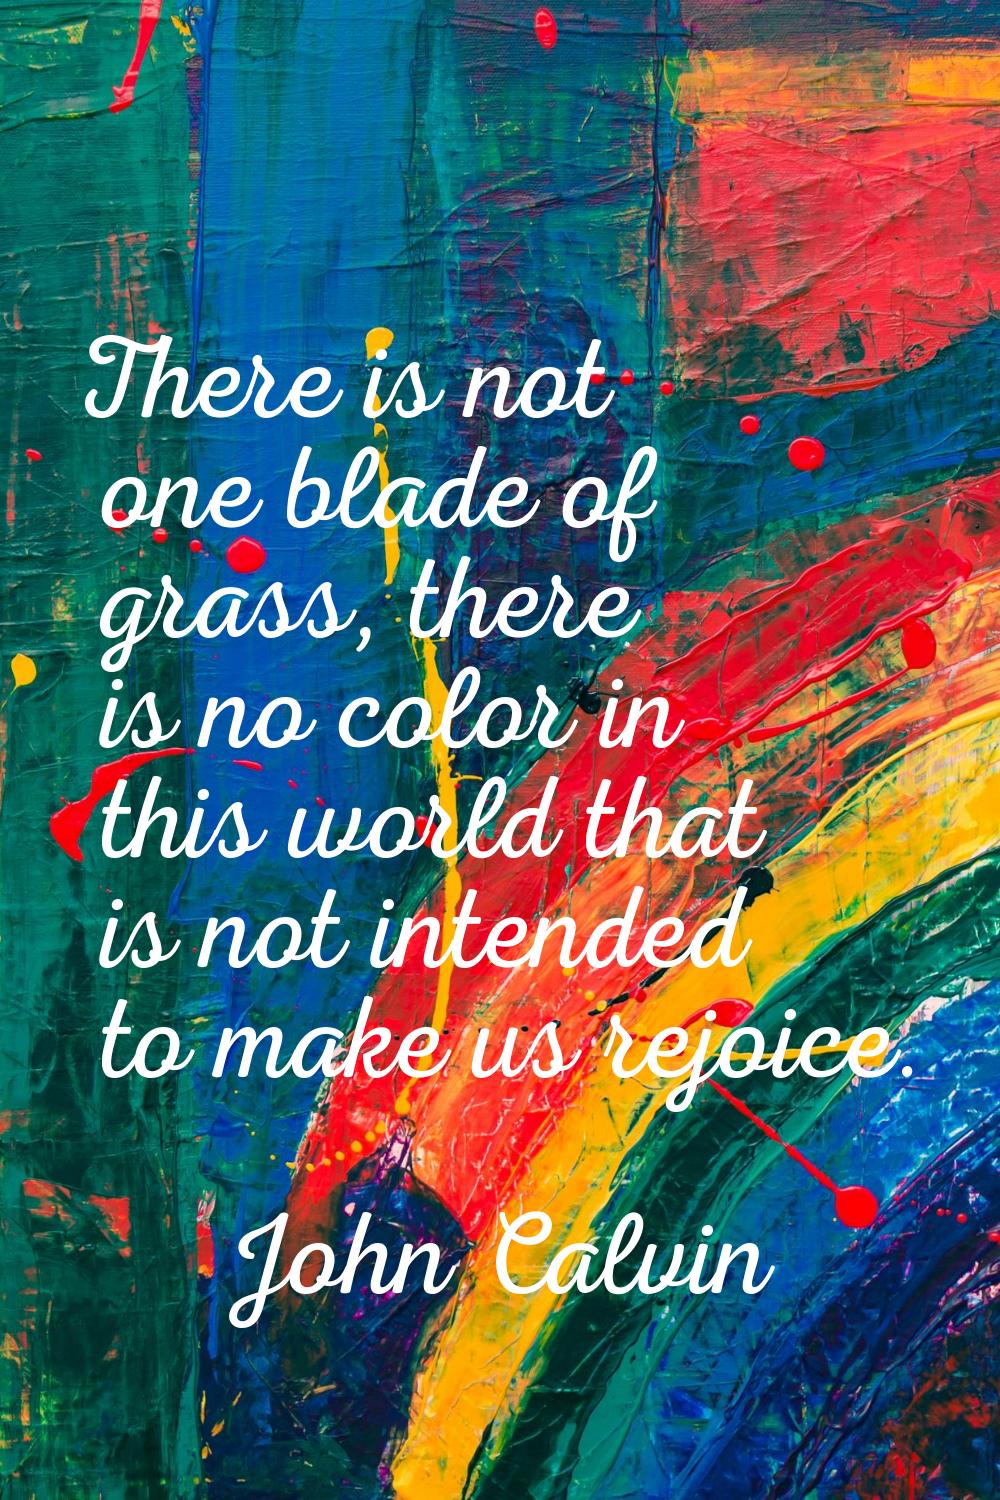 There is not one blade of grass, there is no color in this world that is not intended to make us re